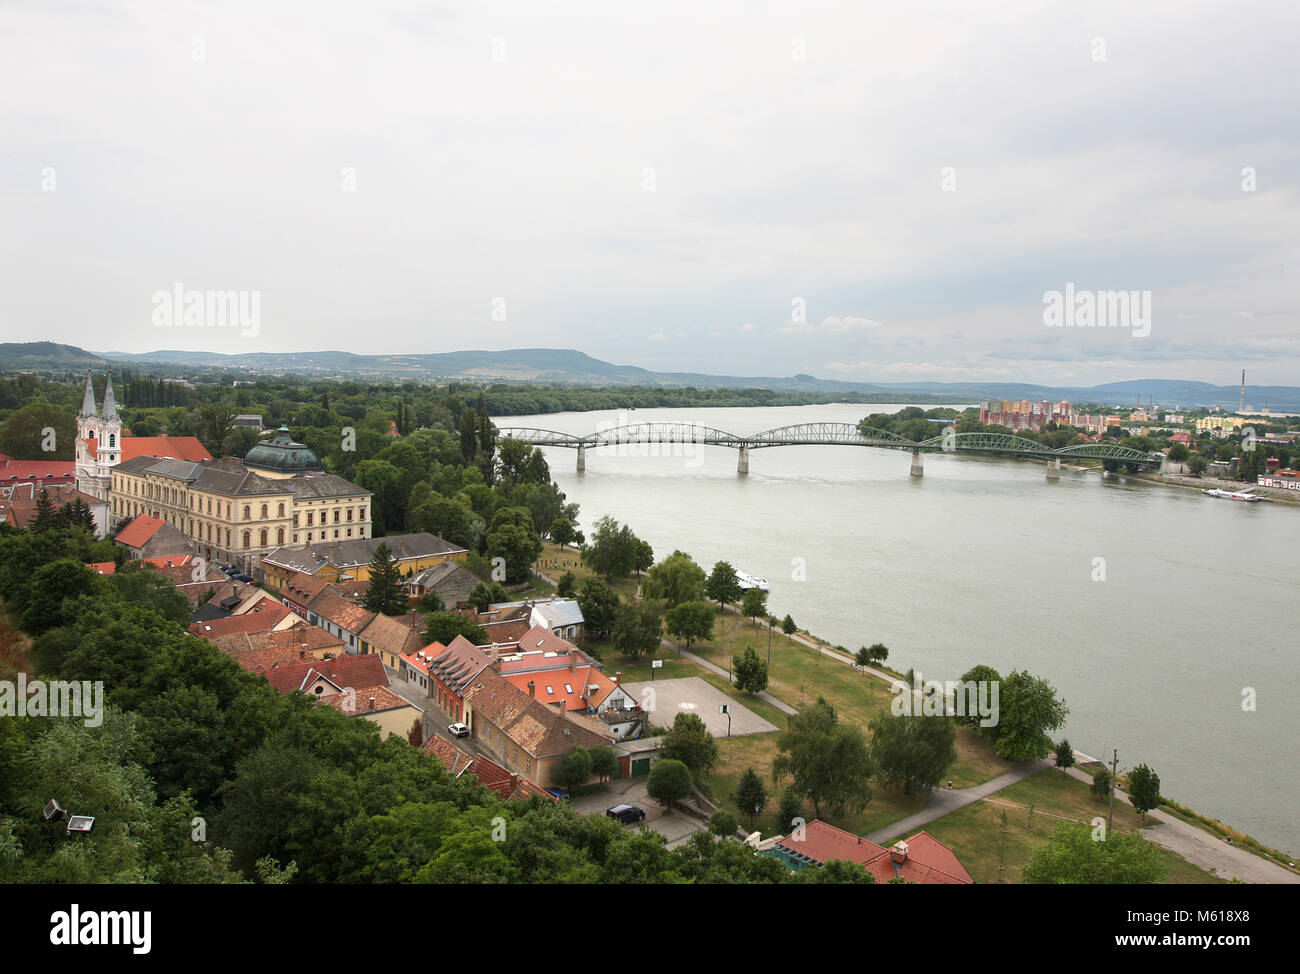 View of the Hungarian historic town Esztergom, the Danube river and the border bridge to the town of Sturovo in Slovakia Stock Photo